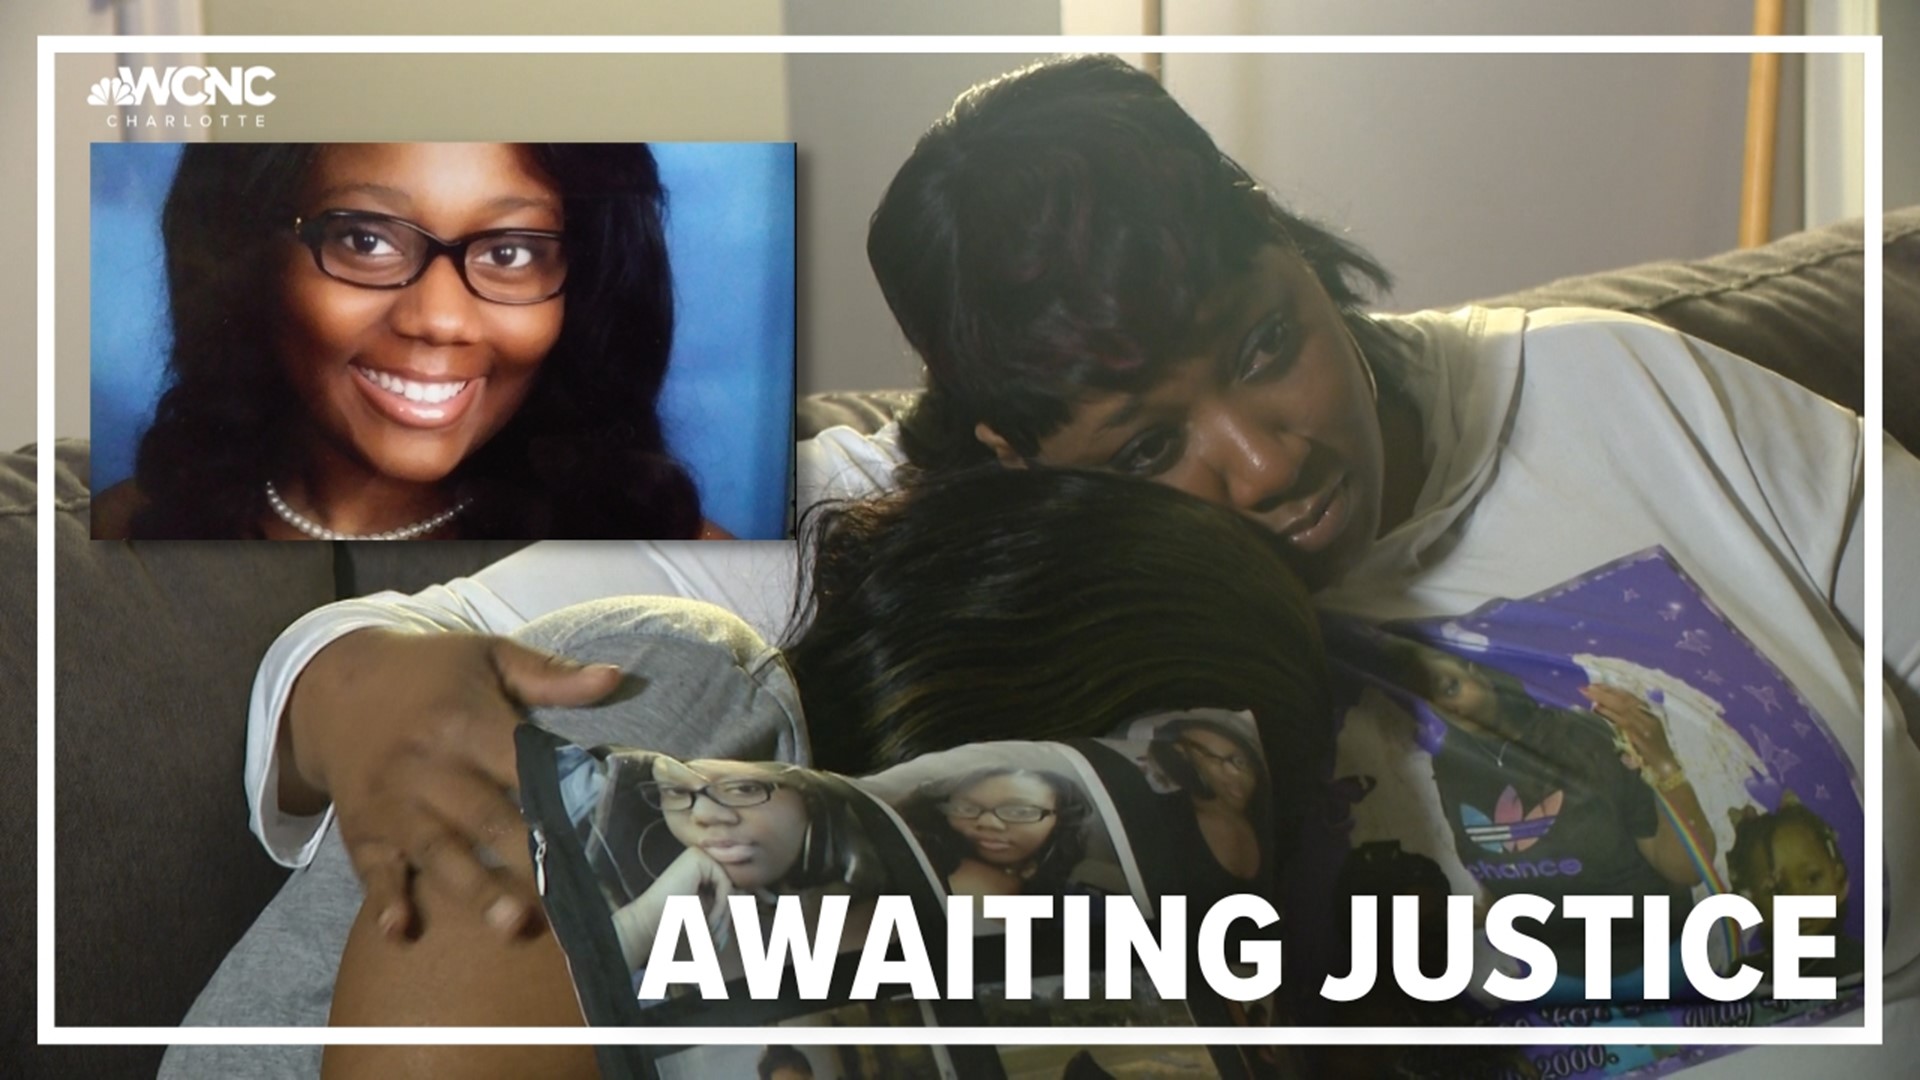 “Immediately I knew it was him that had done it," a mother tells WCNC Charlotte as she awaits years of court delays to get justice for her daughter.